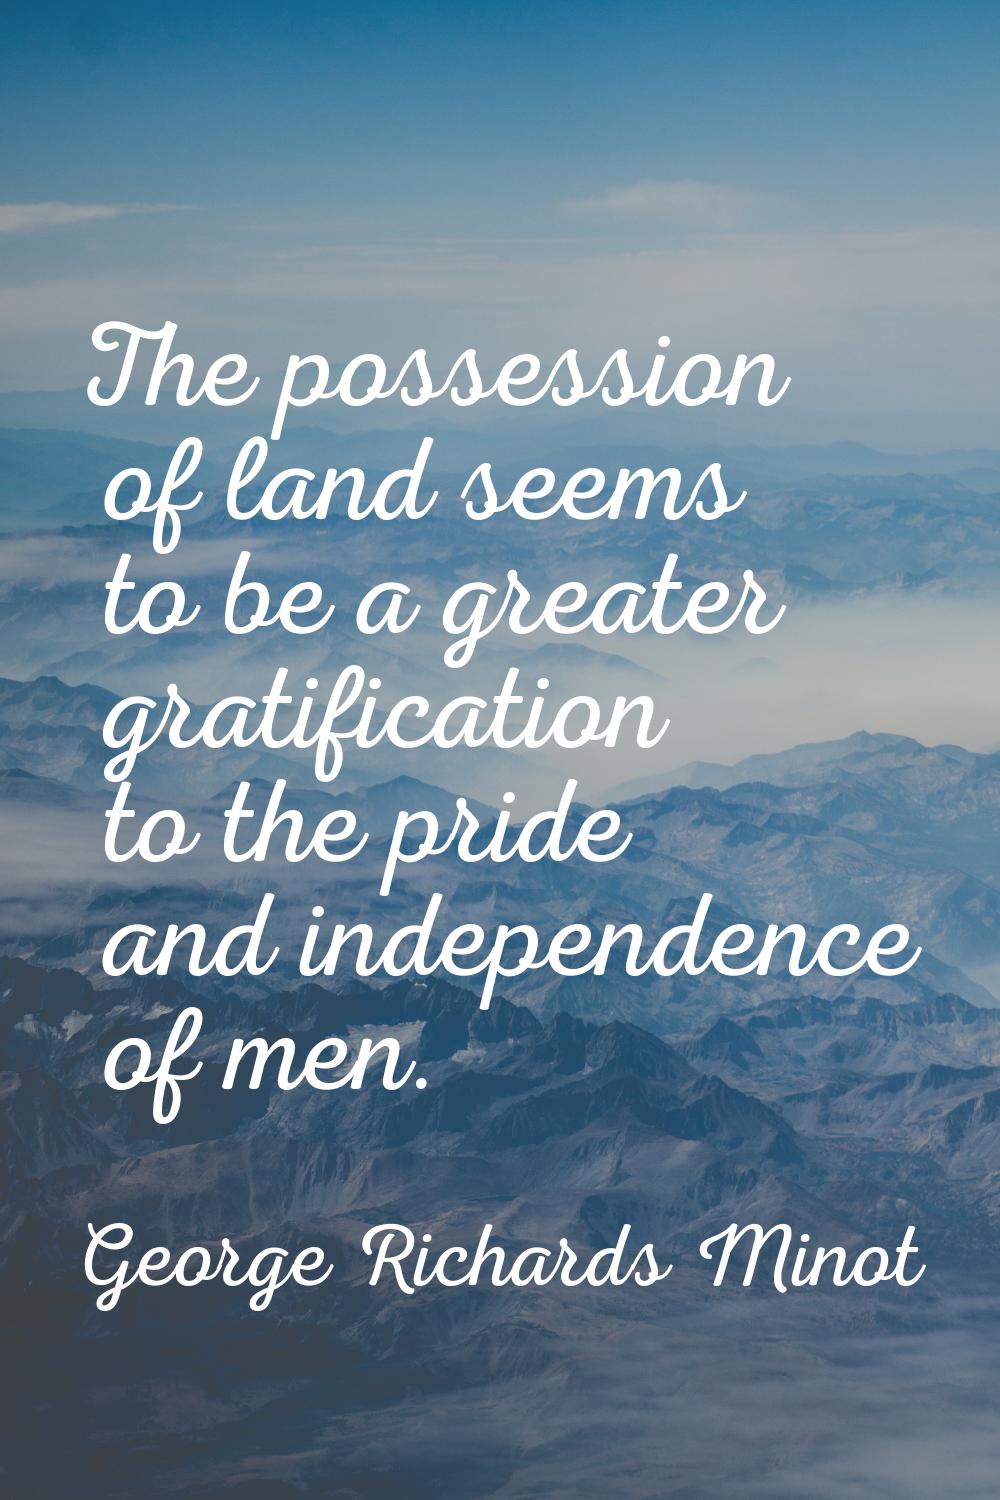 The possession of land seems to be a greater gratification to the pride and independence of men.